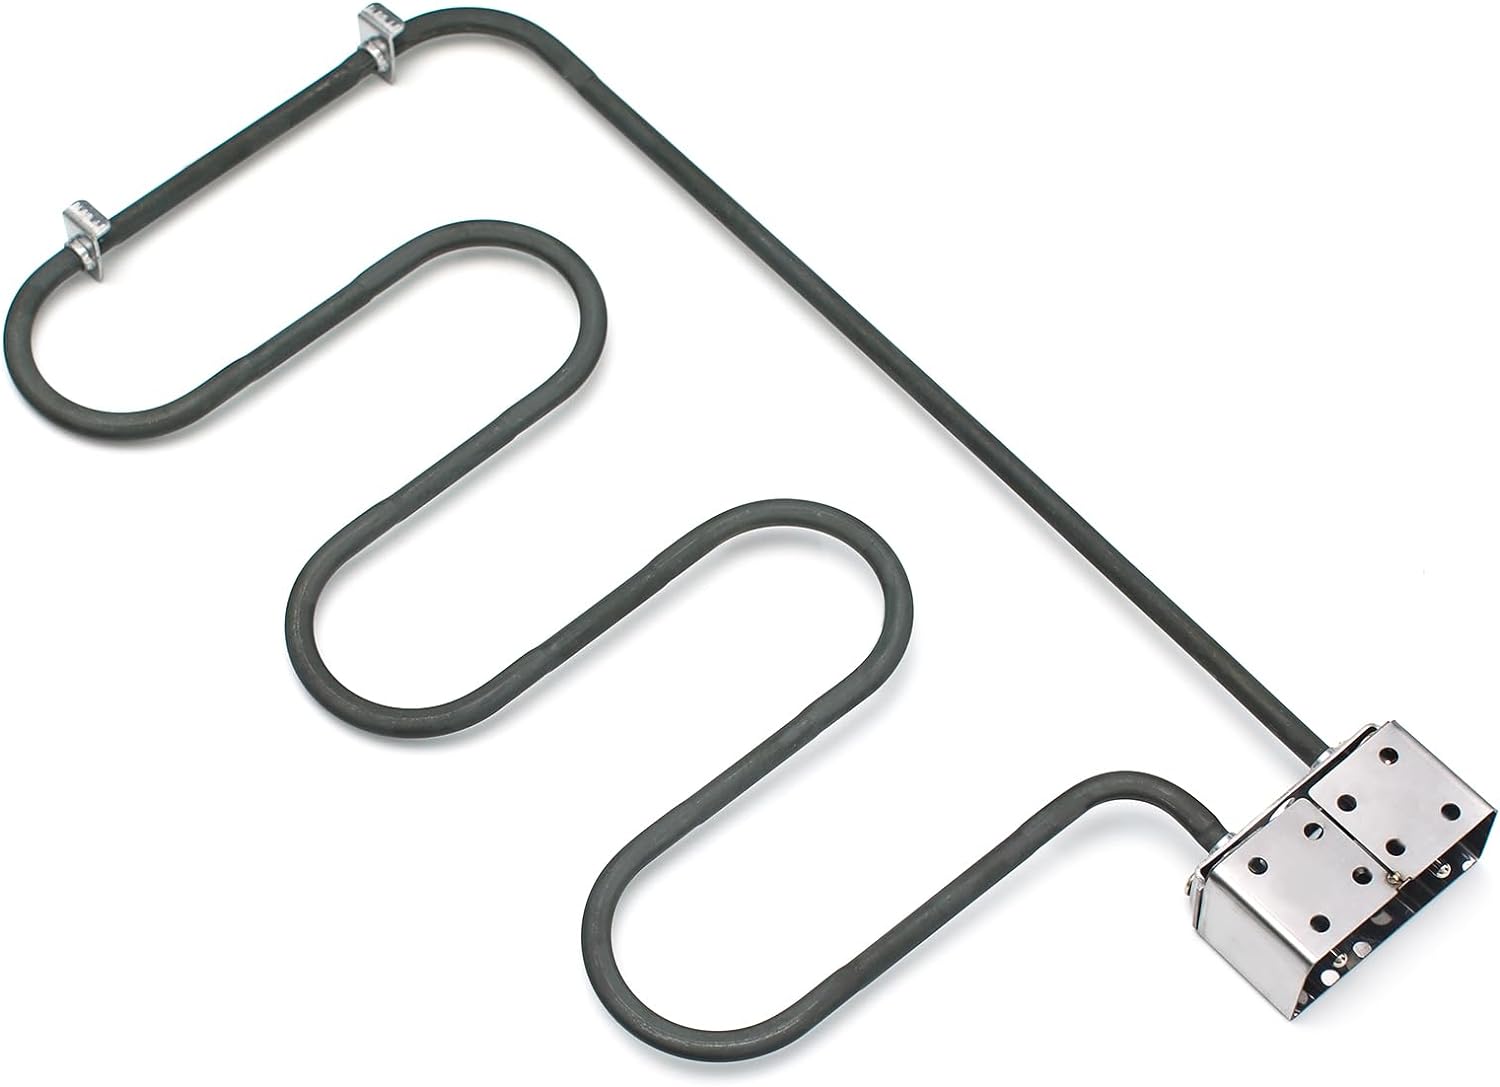 BMMXBI Grill Heating Element Review